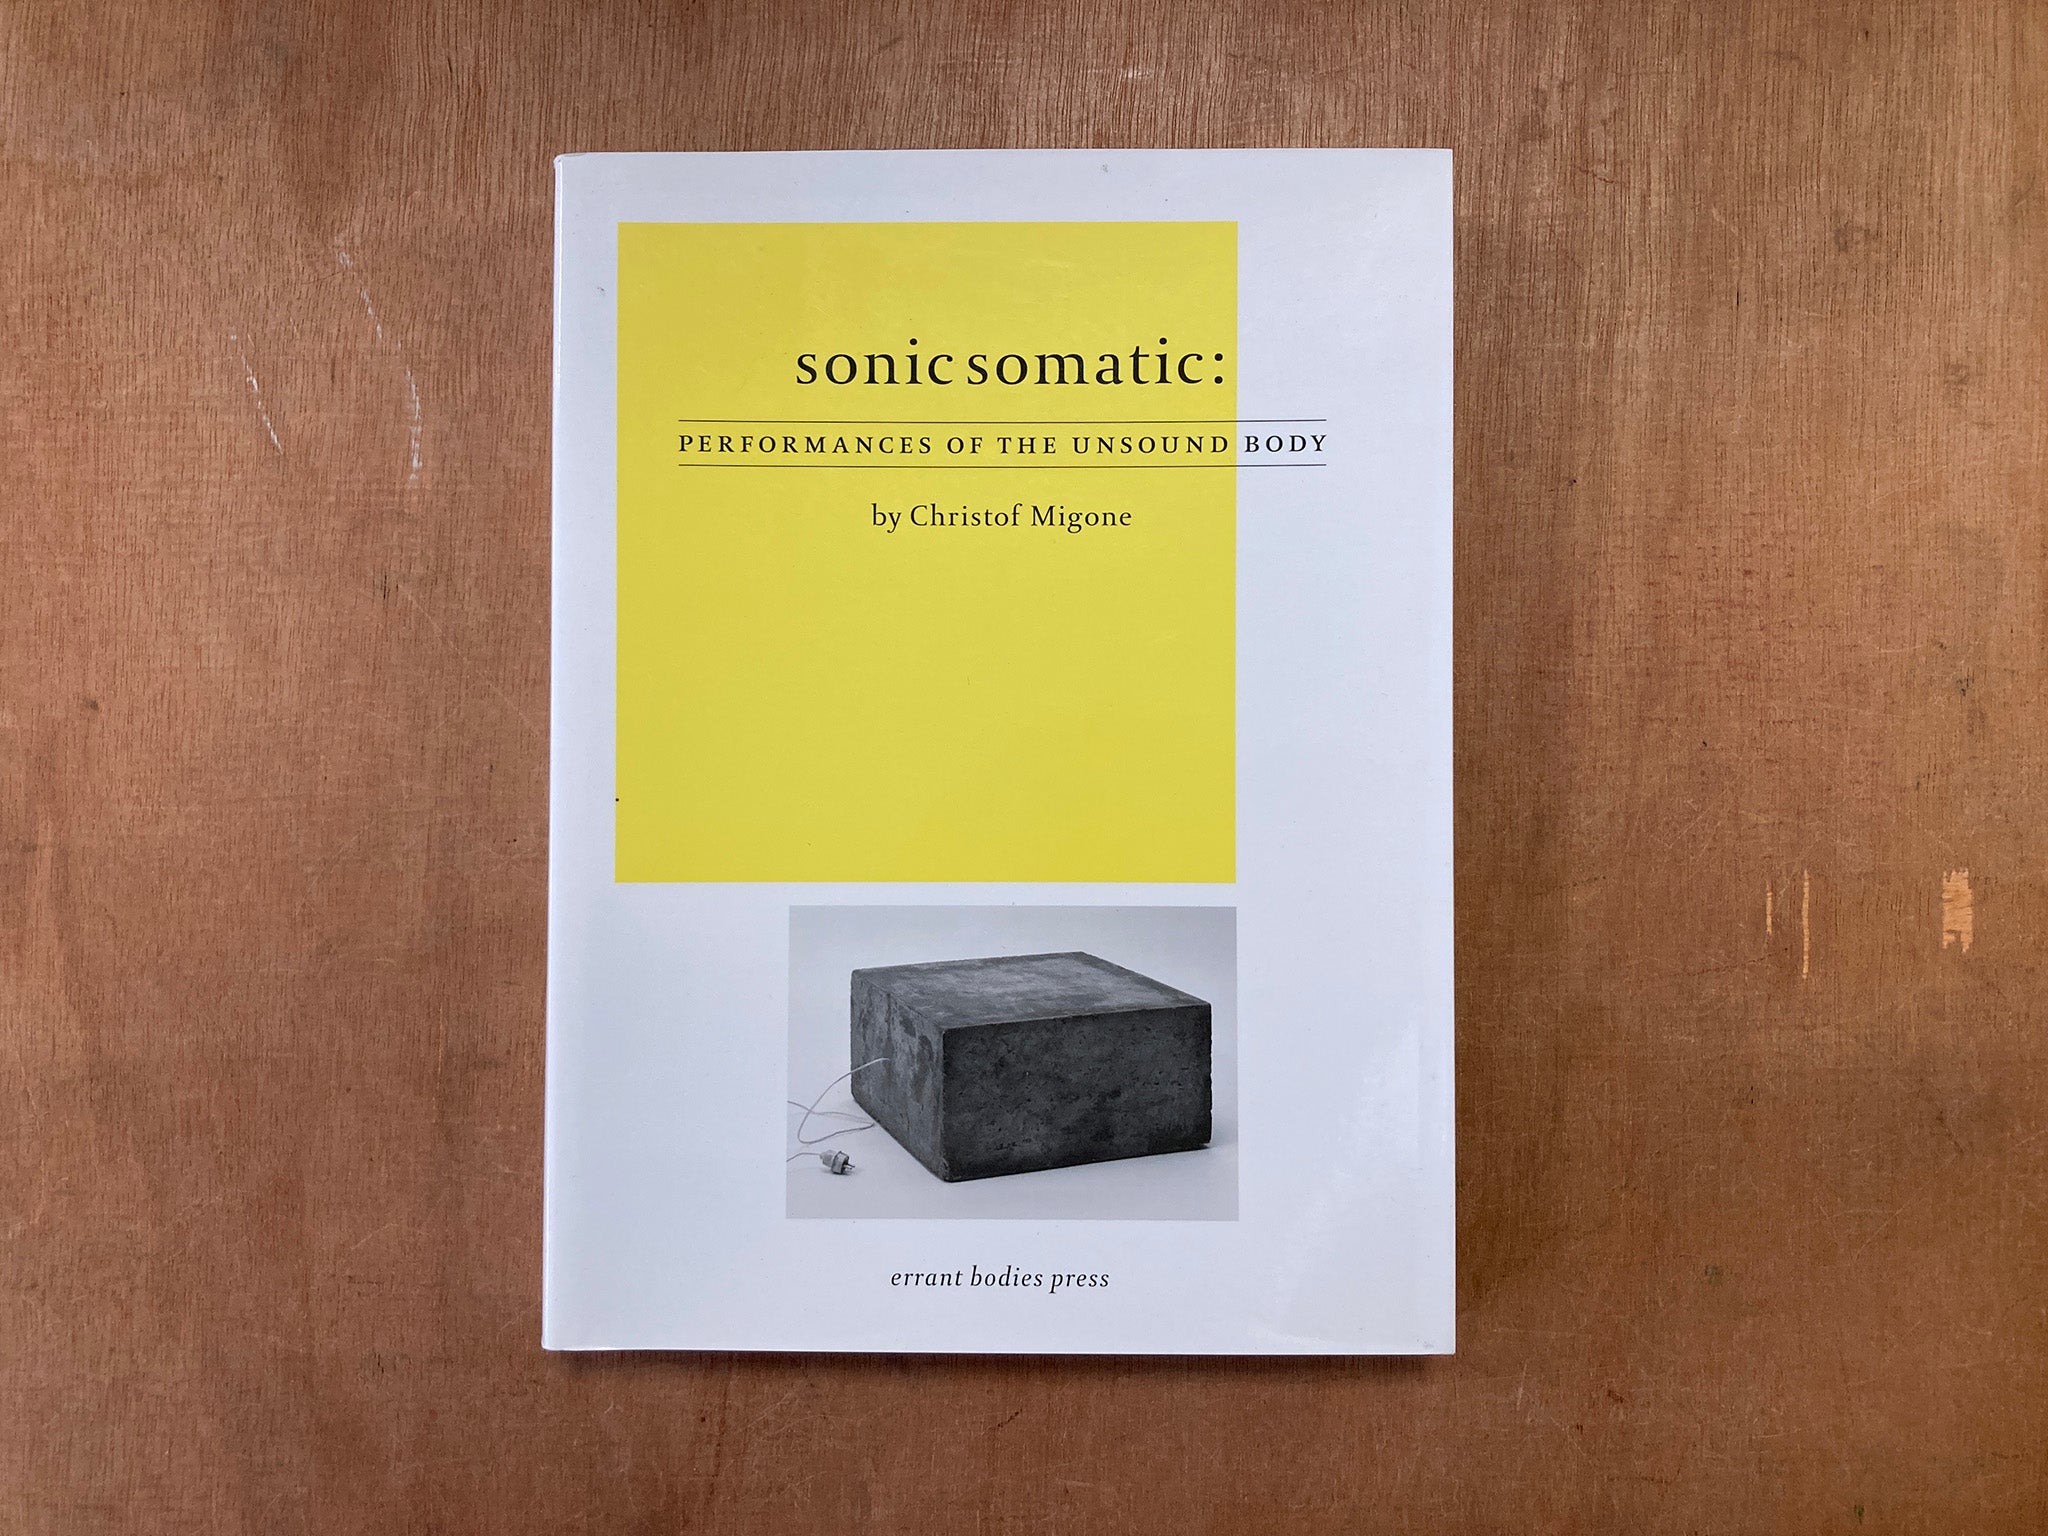 SONIC SOMATIC – PERFORMANCES OF THE UNSOUND BODY by Christof Migone